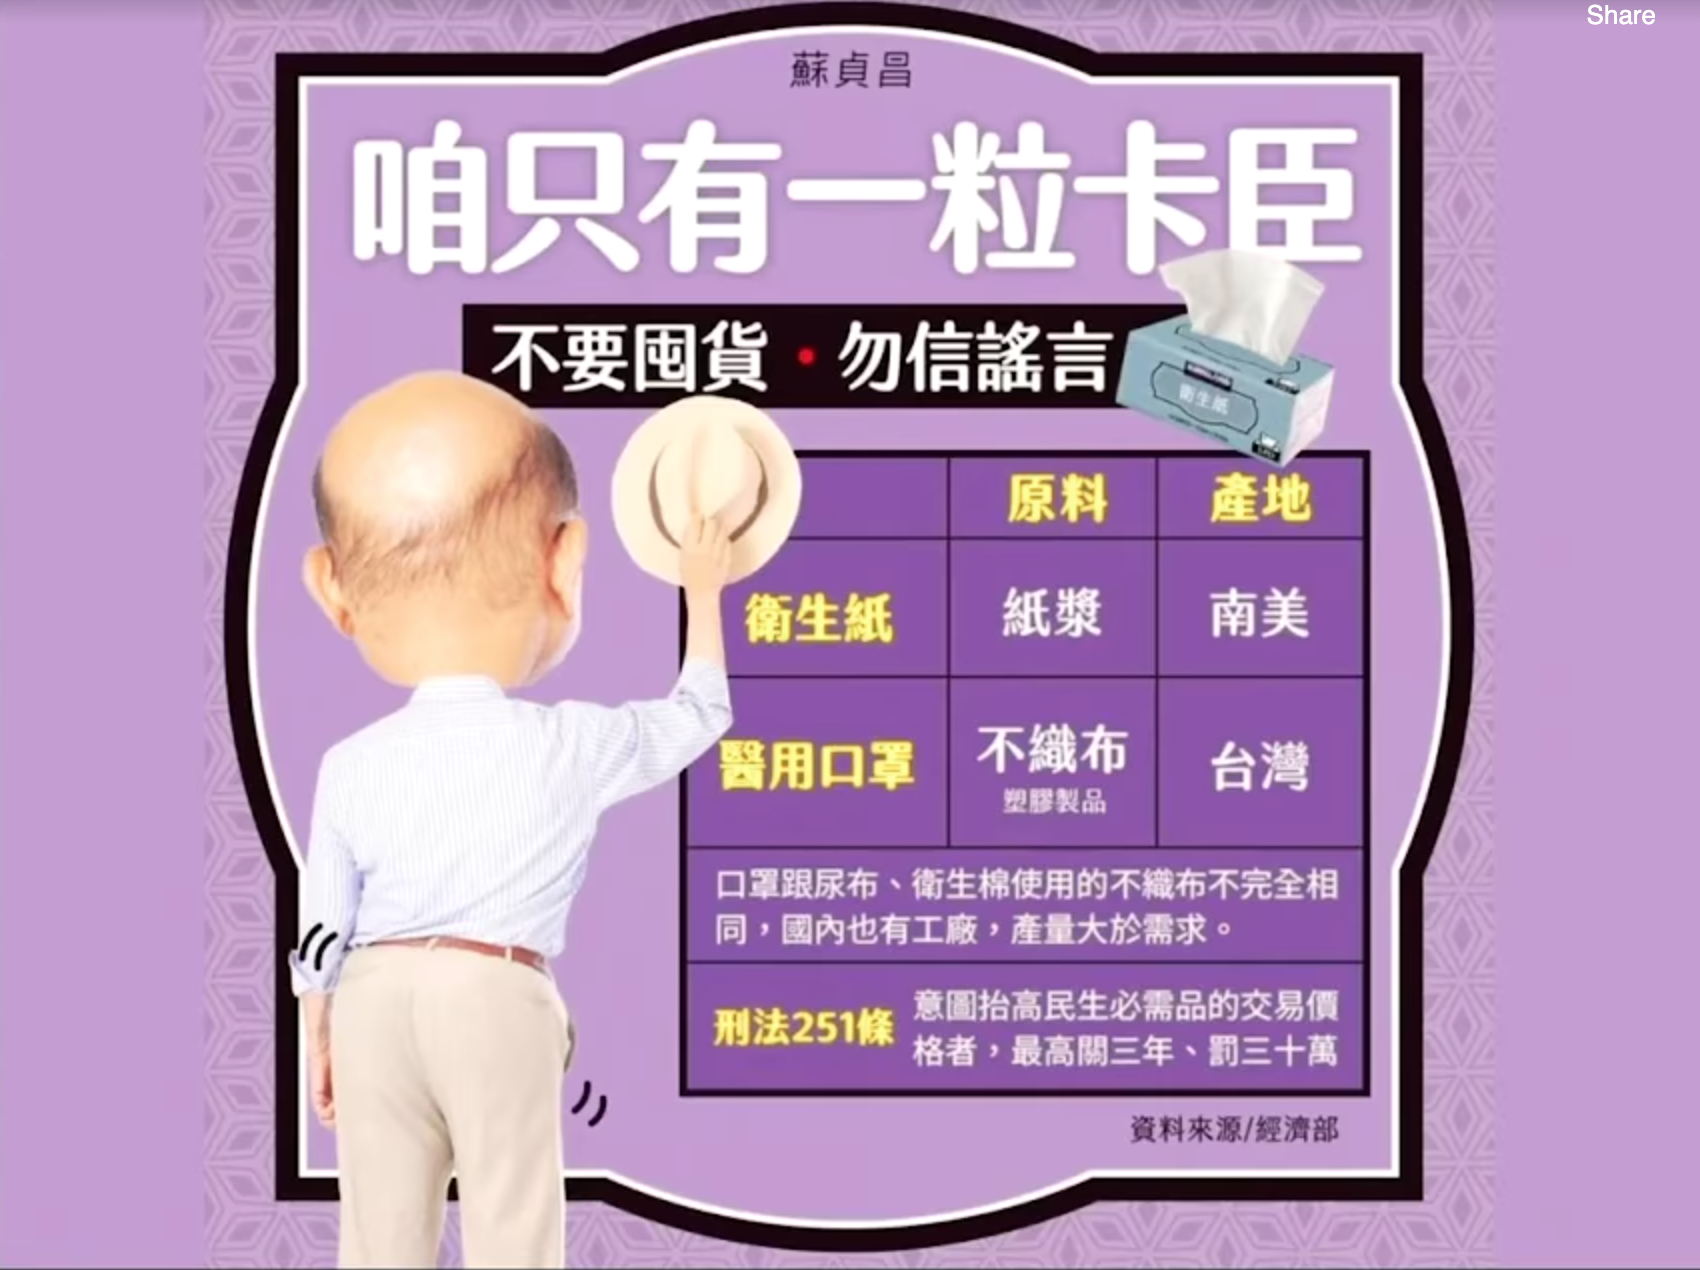 “We only have one pair of buttocks” meme from Taiwanese Premier Su Tseng-chang.